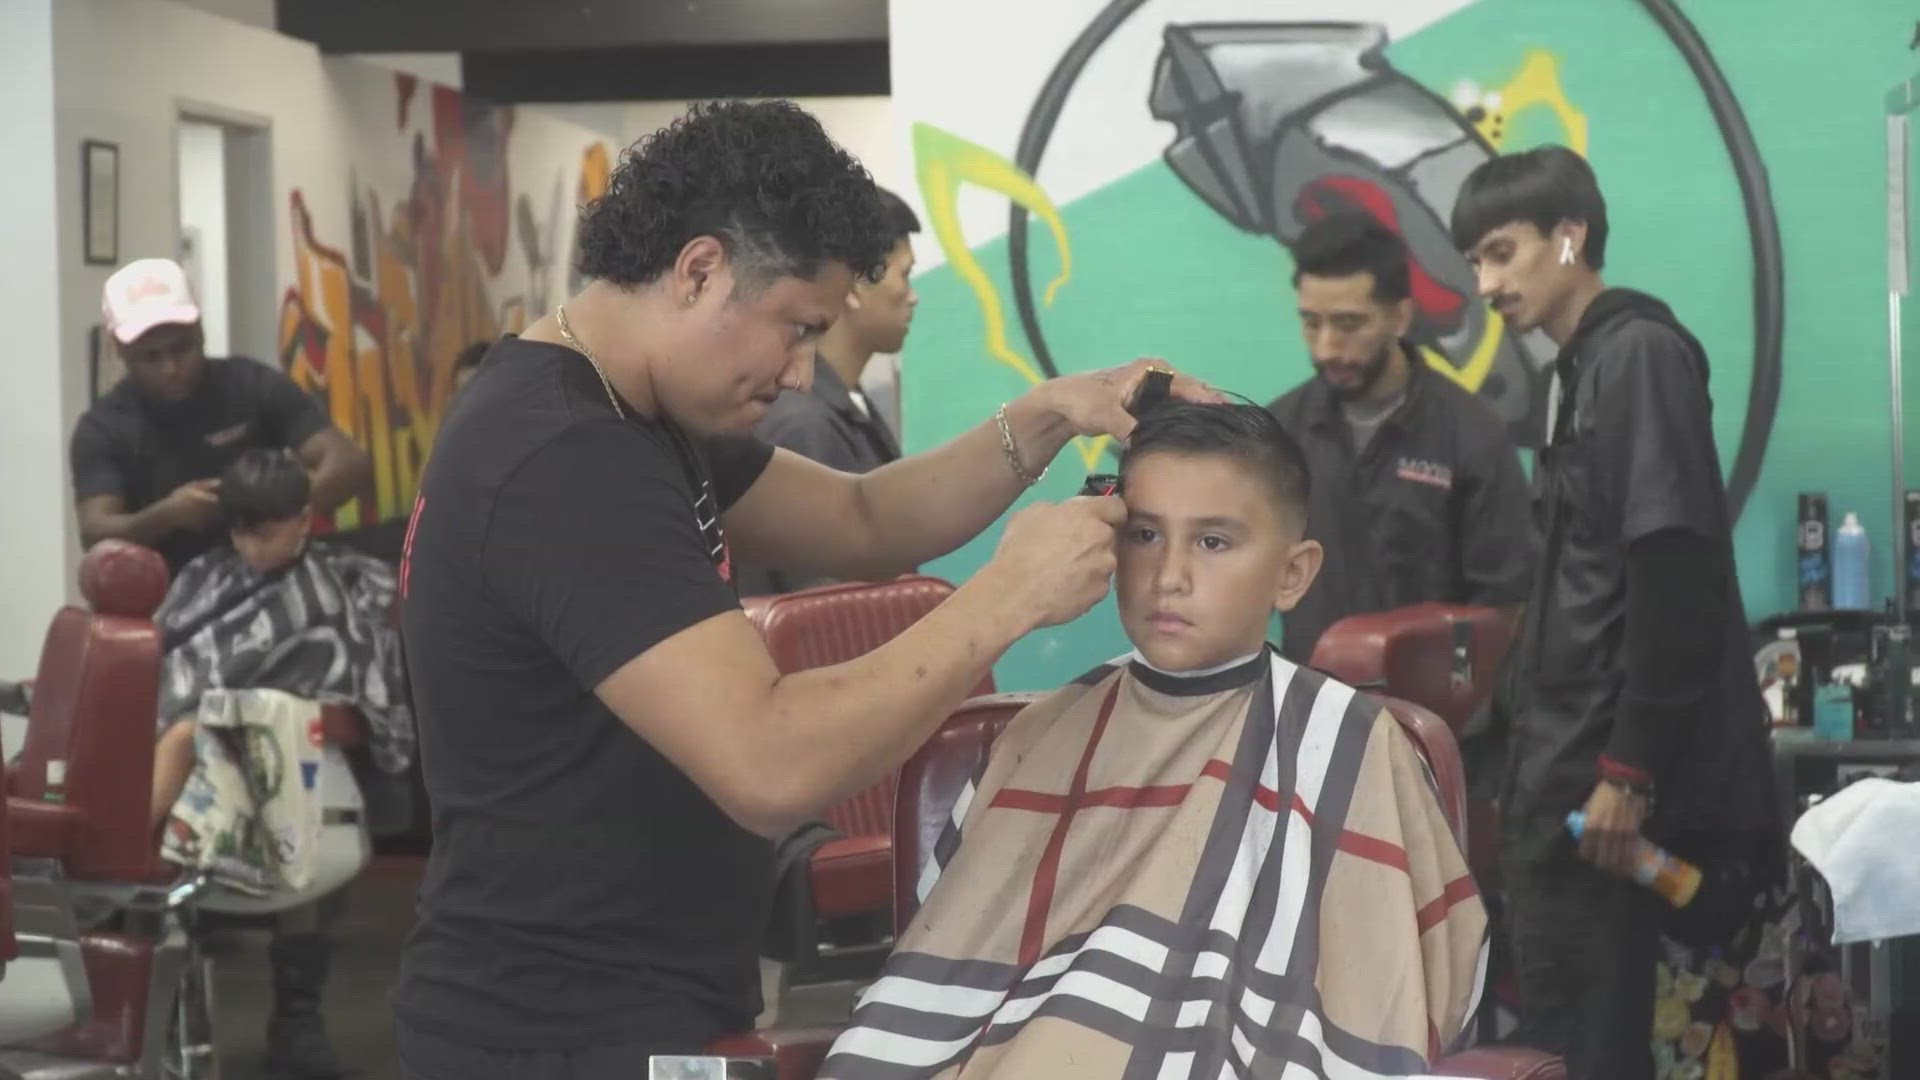 More than 300 students get free school supplies and haircuts in Sacramento